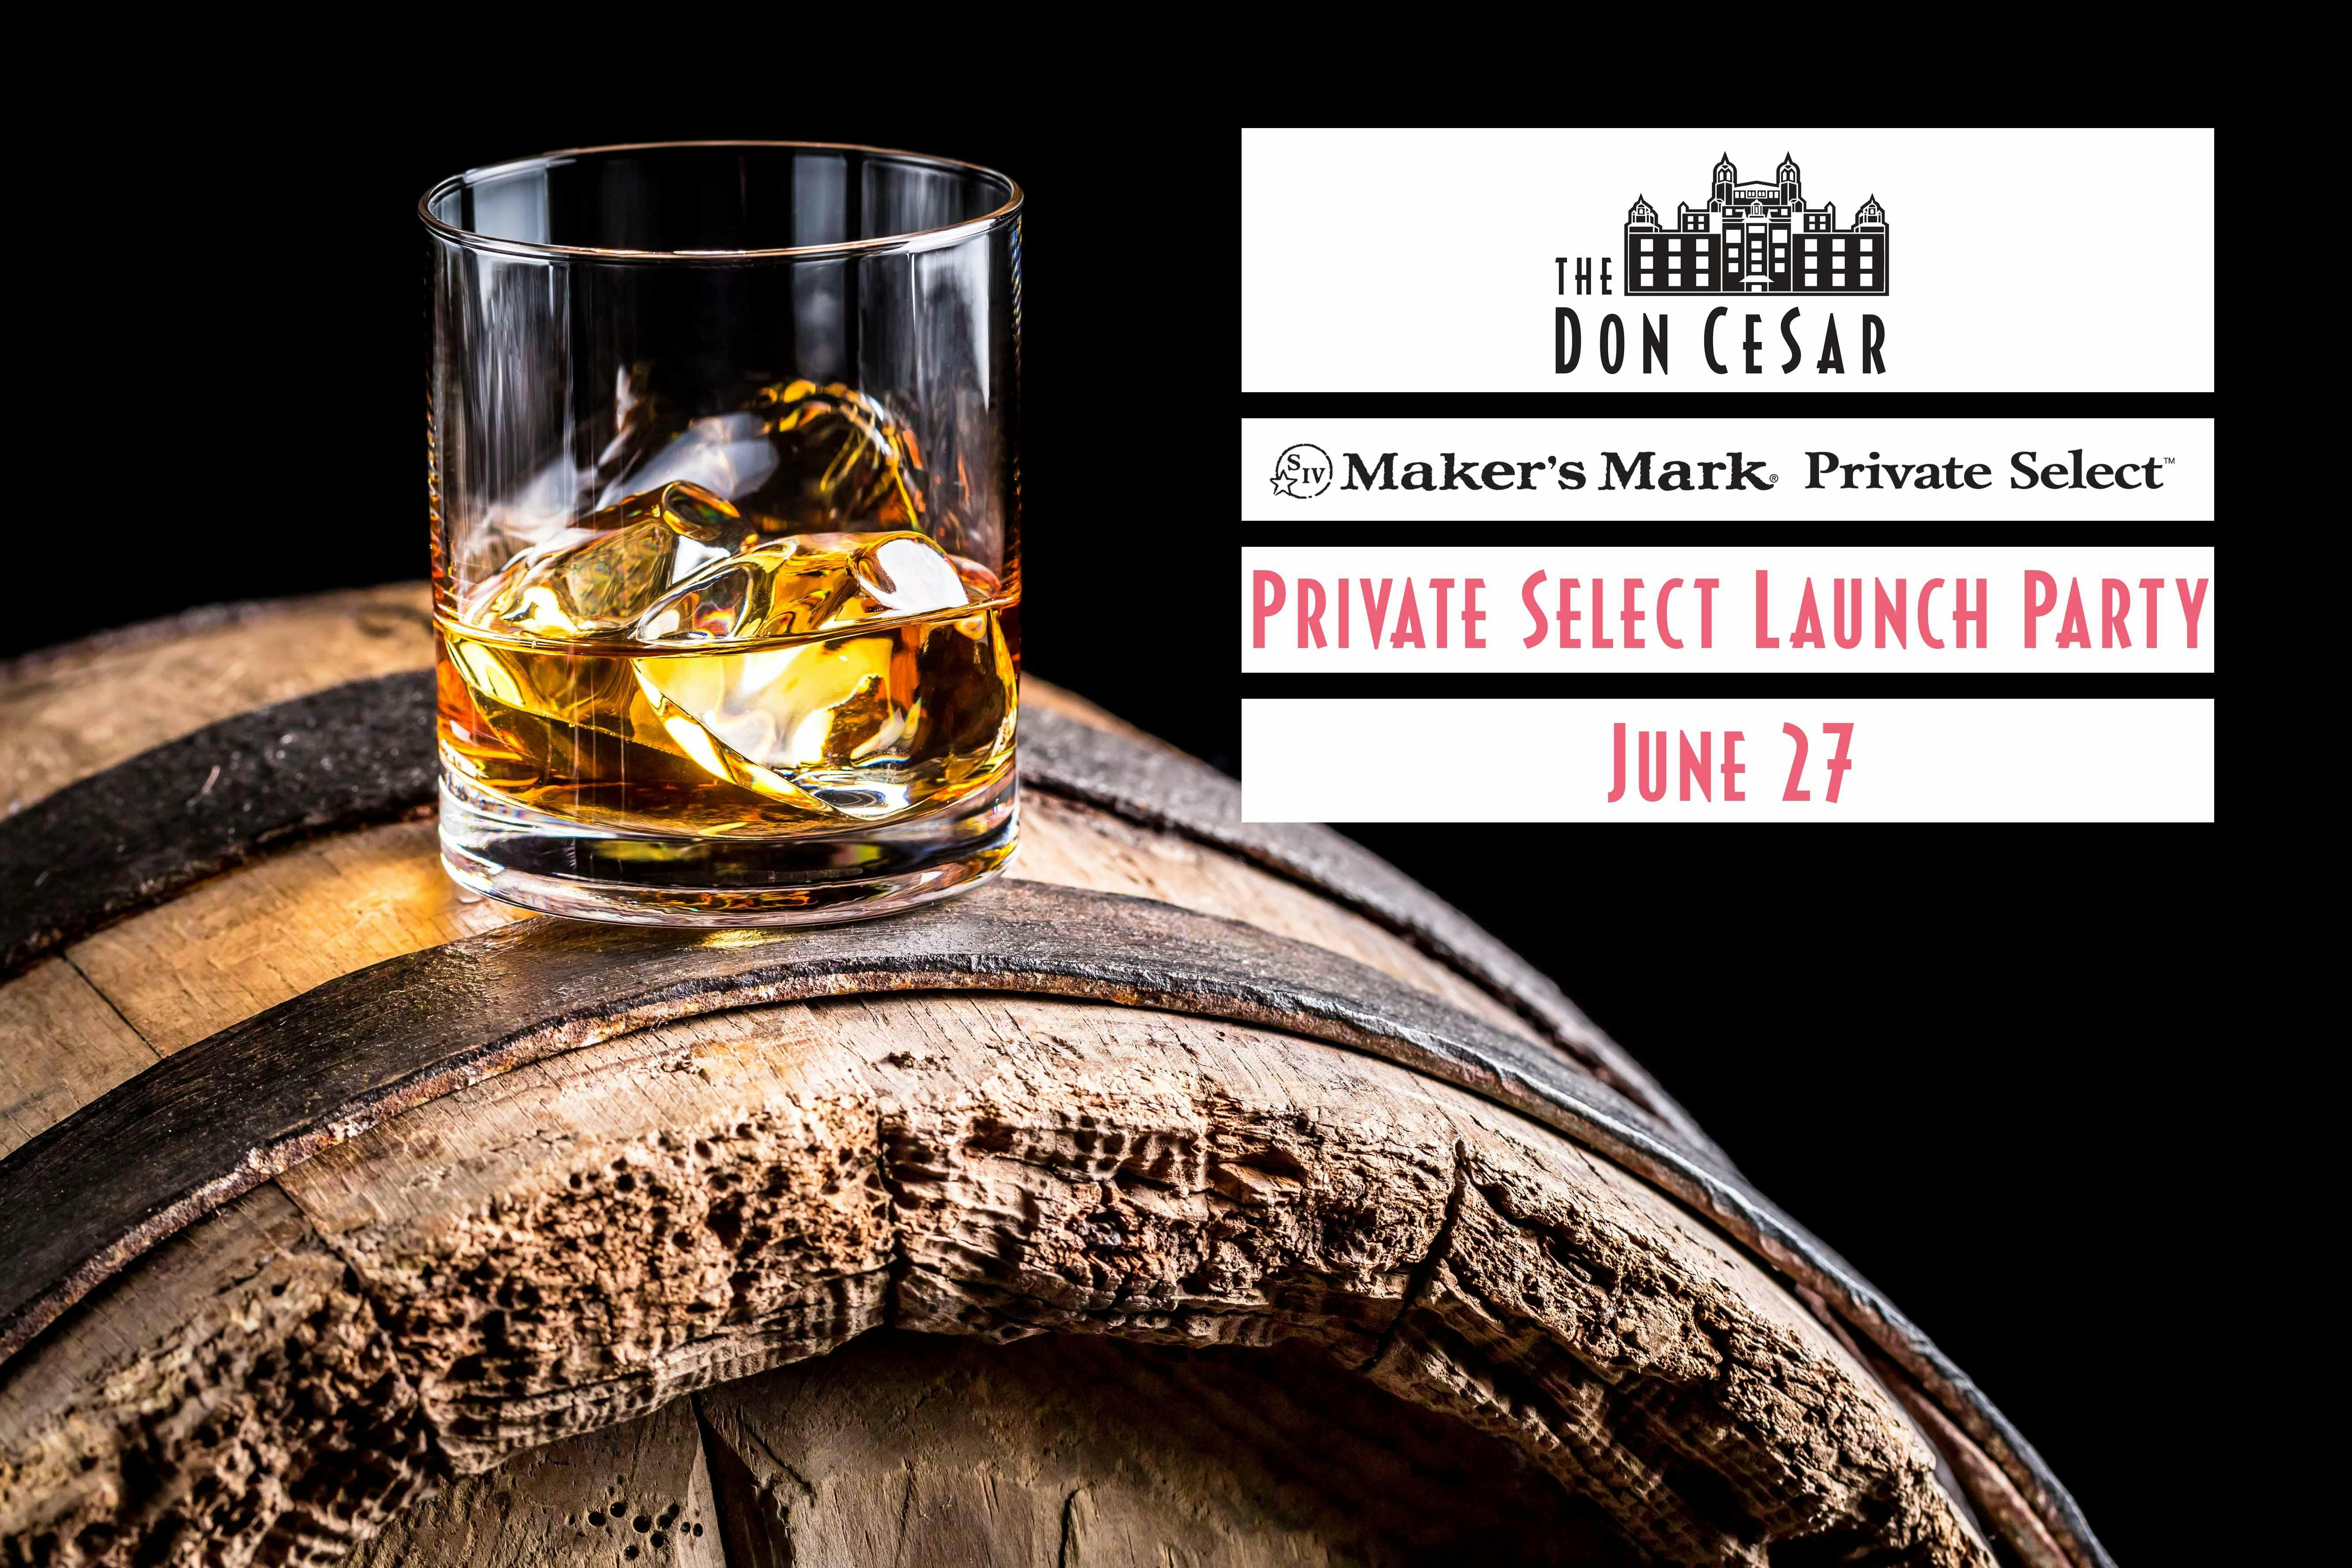 Don Cesar’s Private Select Launch Party